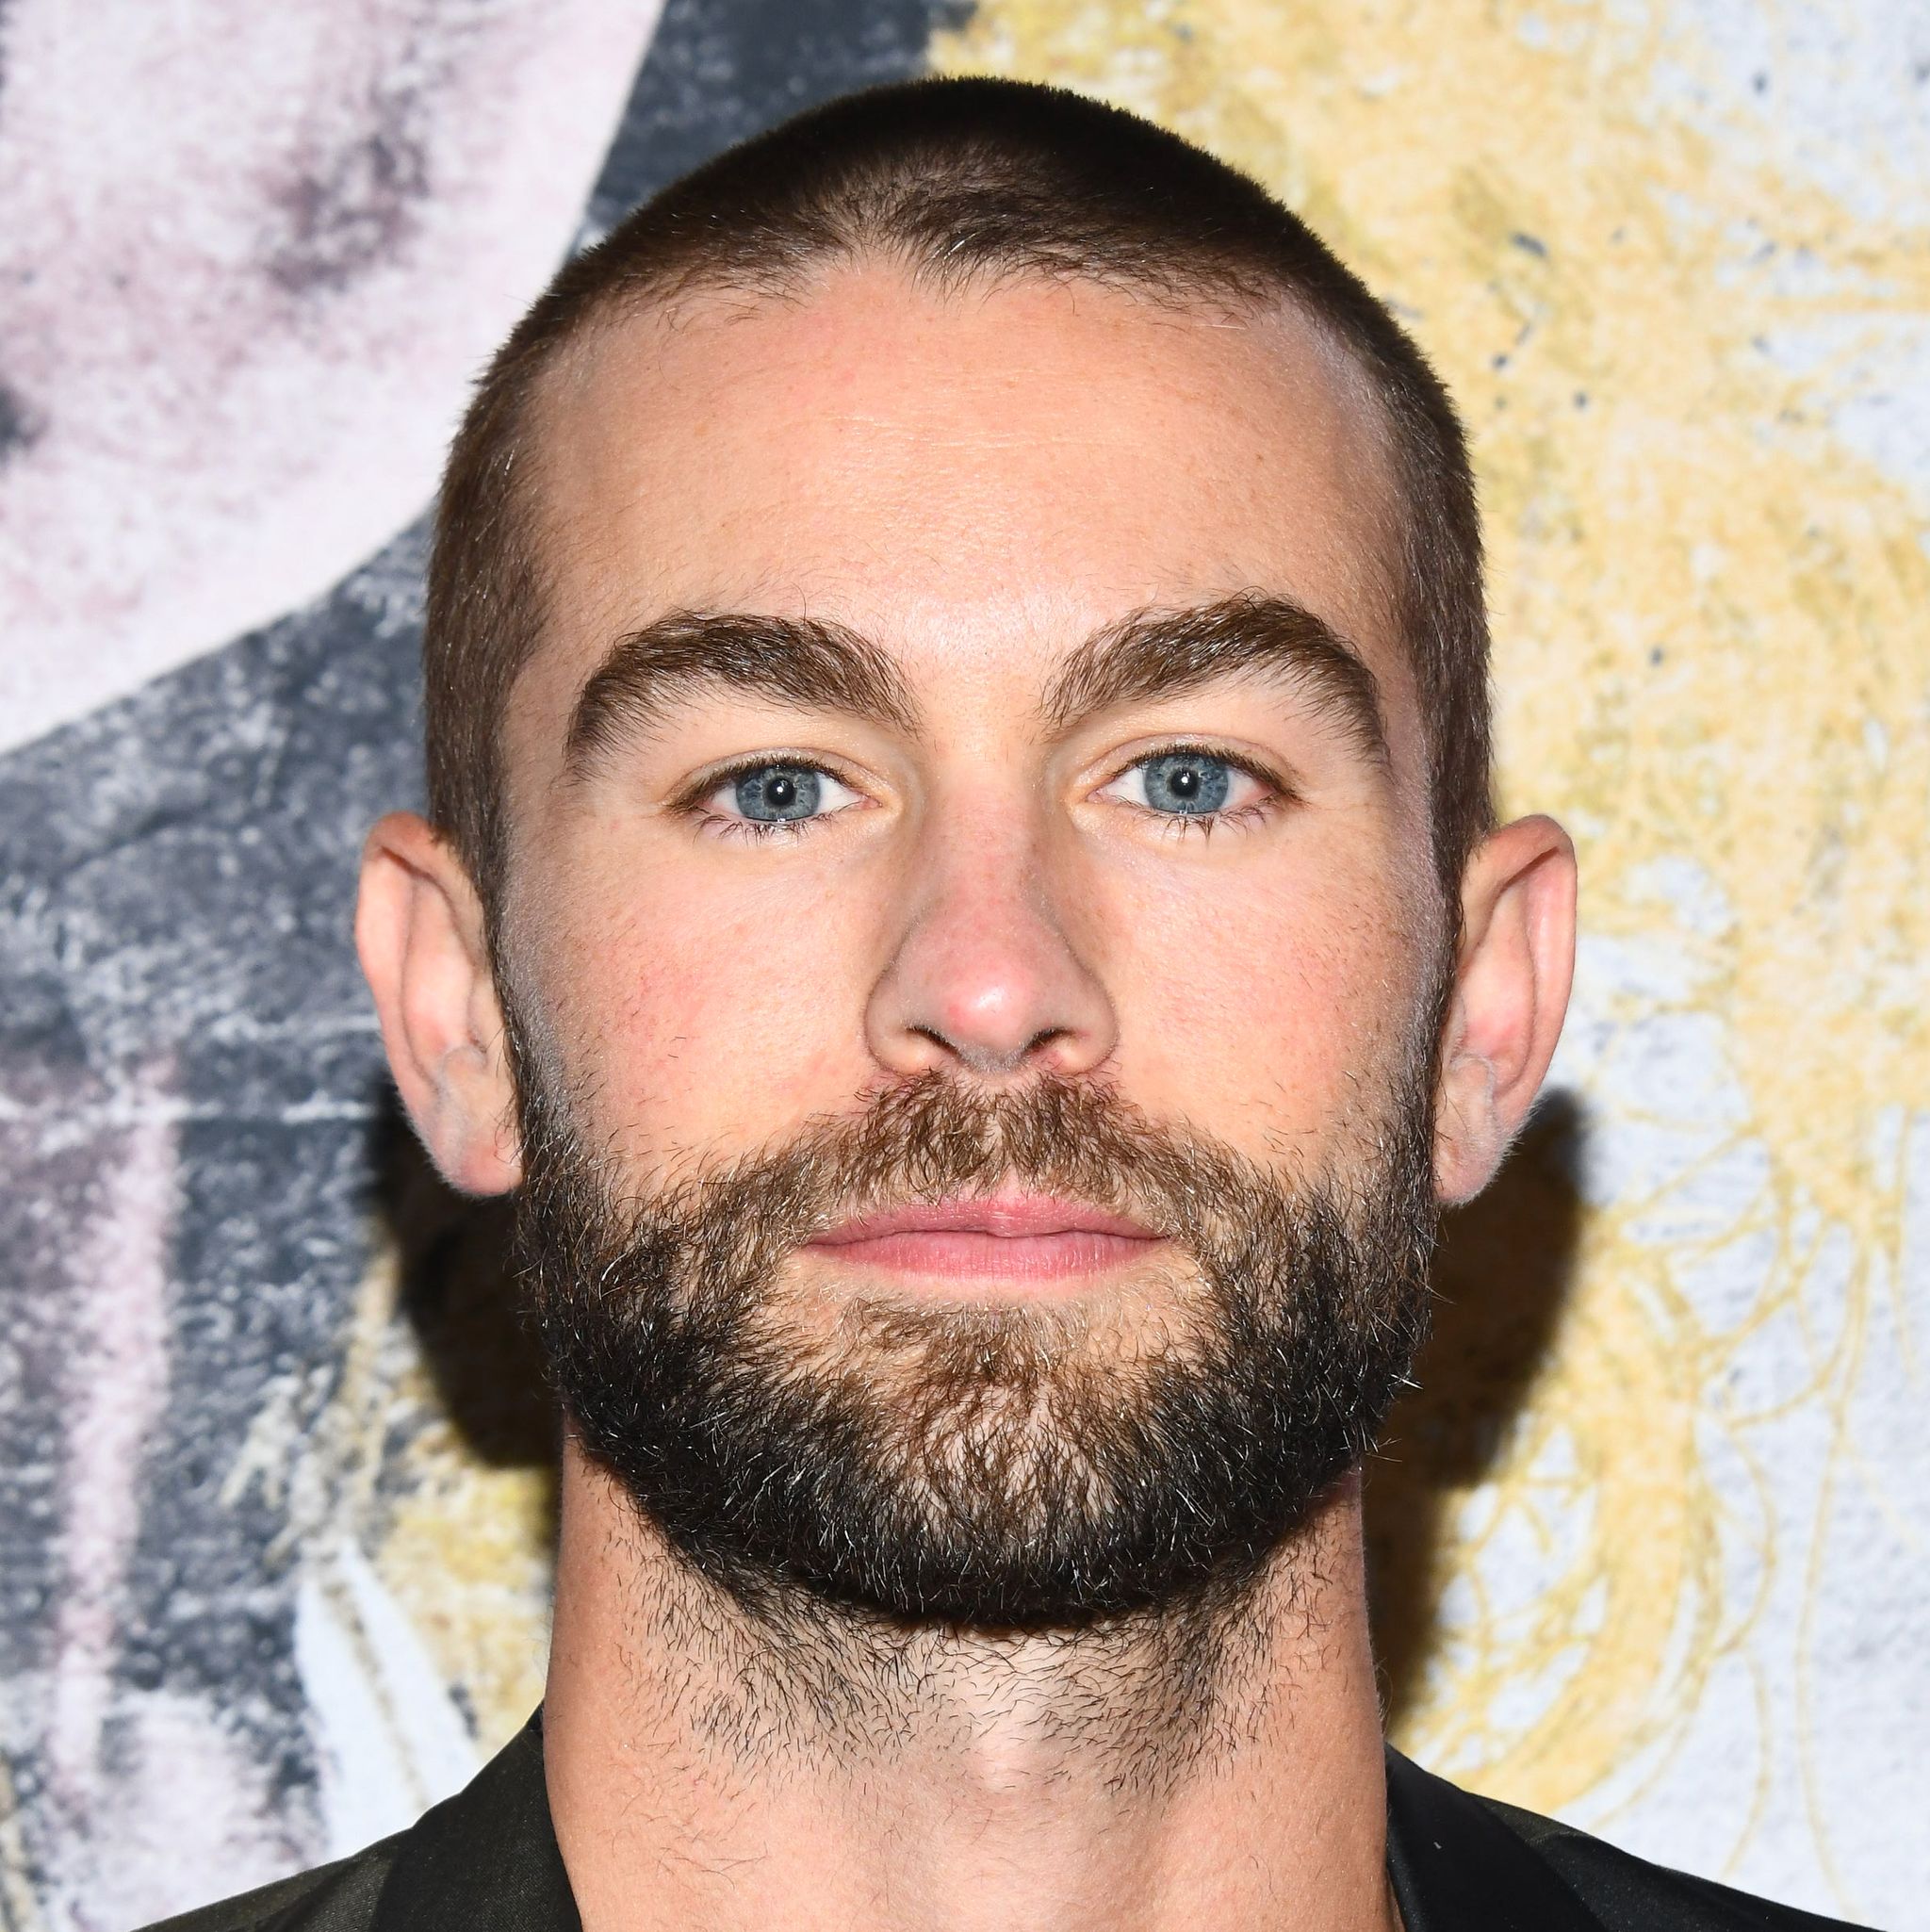 Chace Crawford at Comic Con 2019